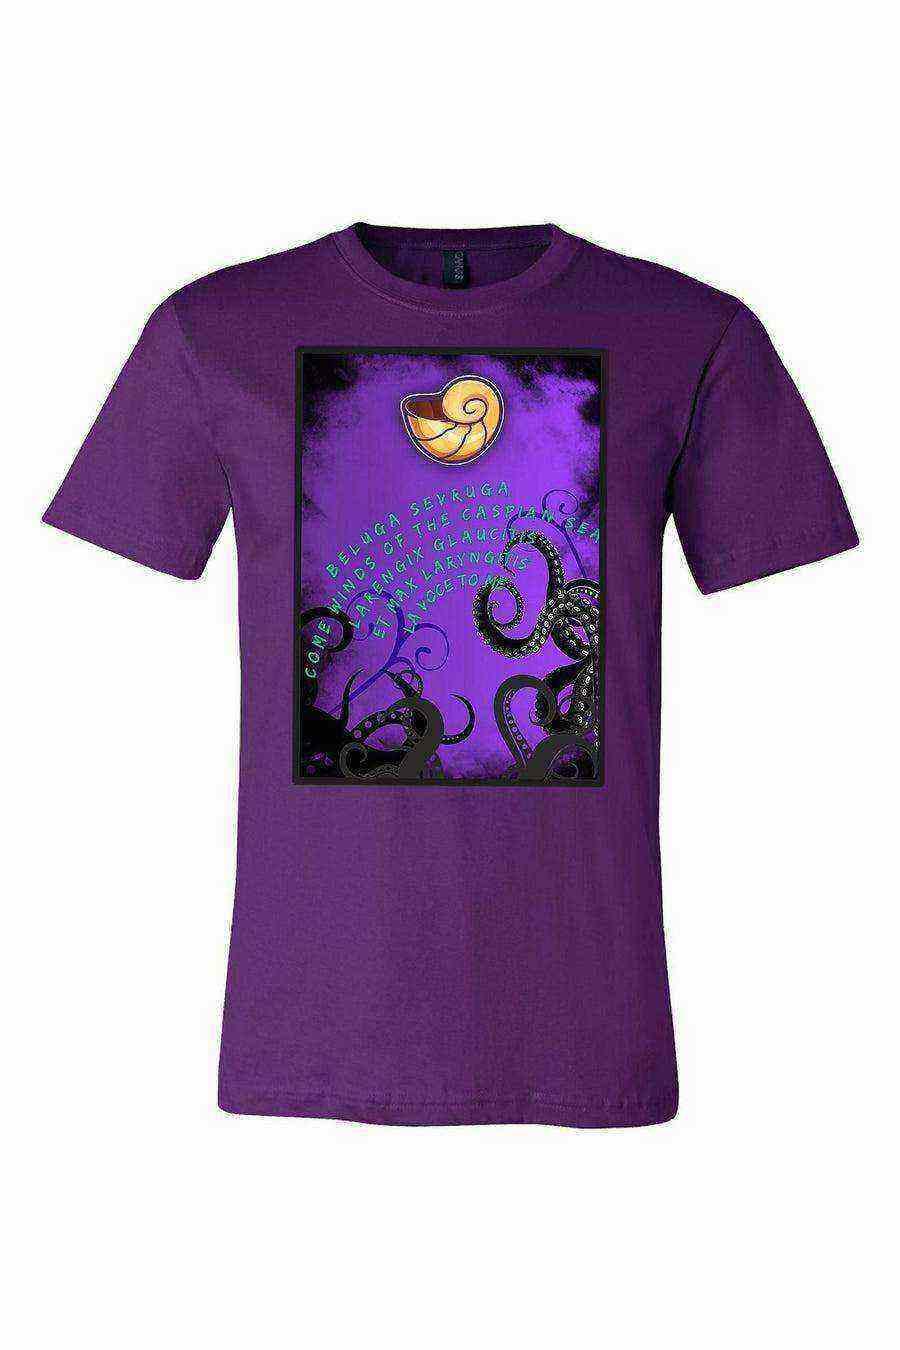 Youth | Ursulas Spell Shirt | Poor Unfortunate Souls Shirt - Dylan's Tees